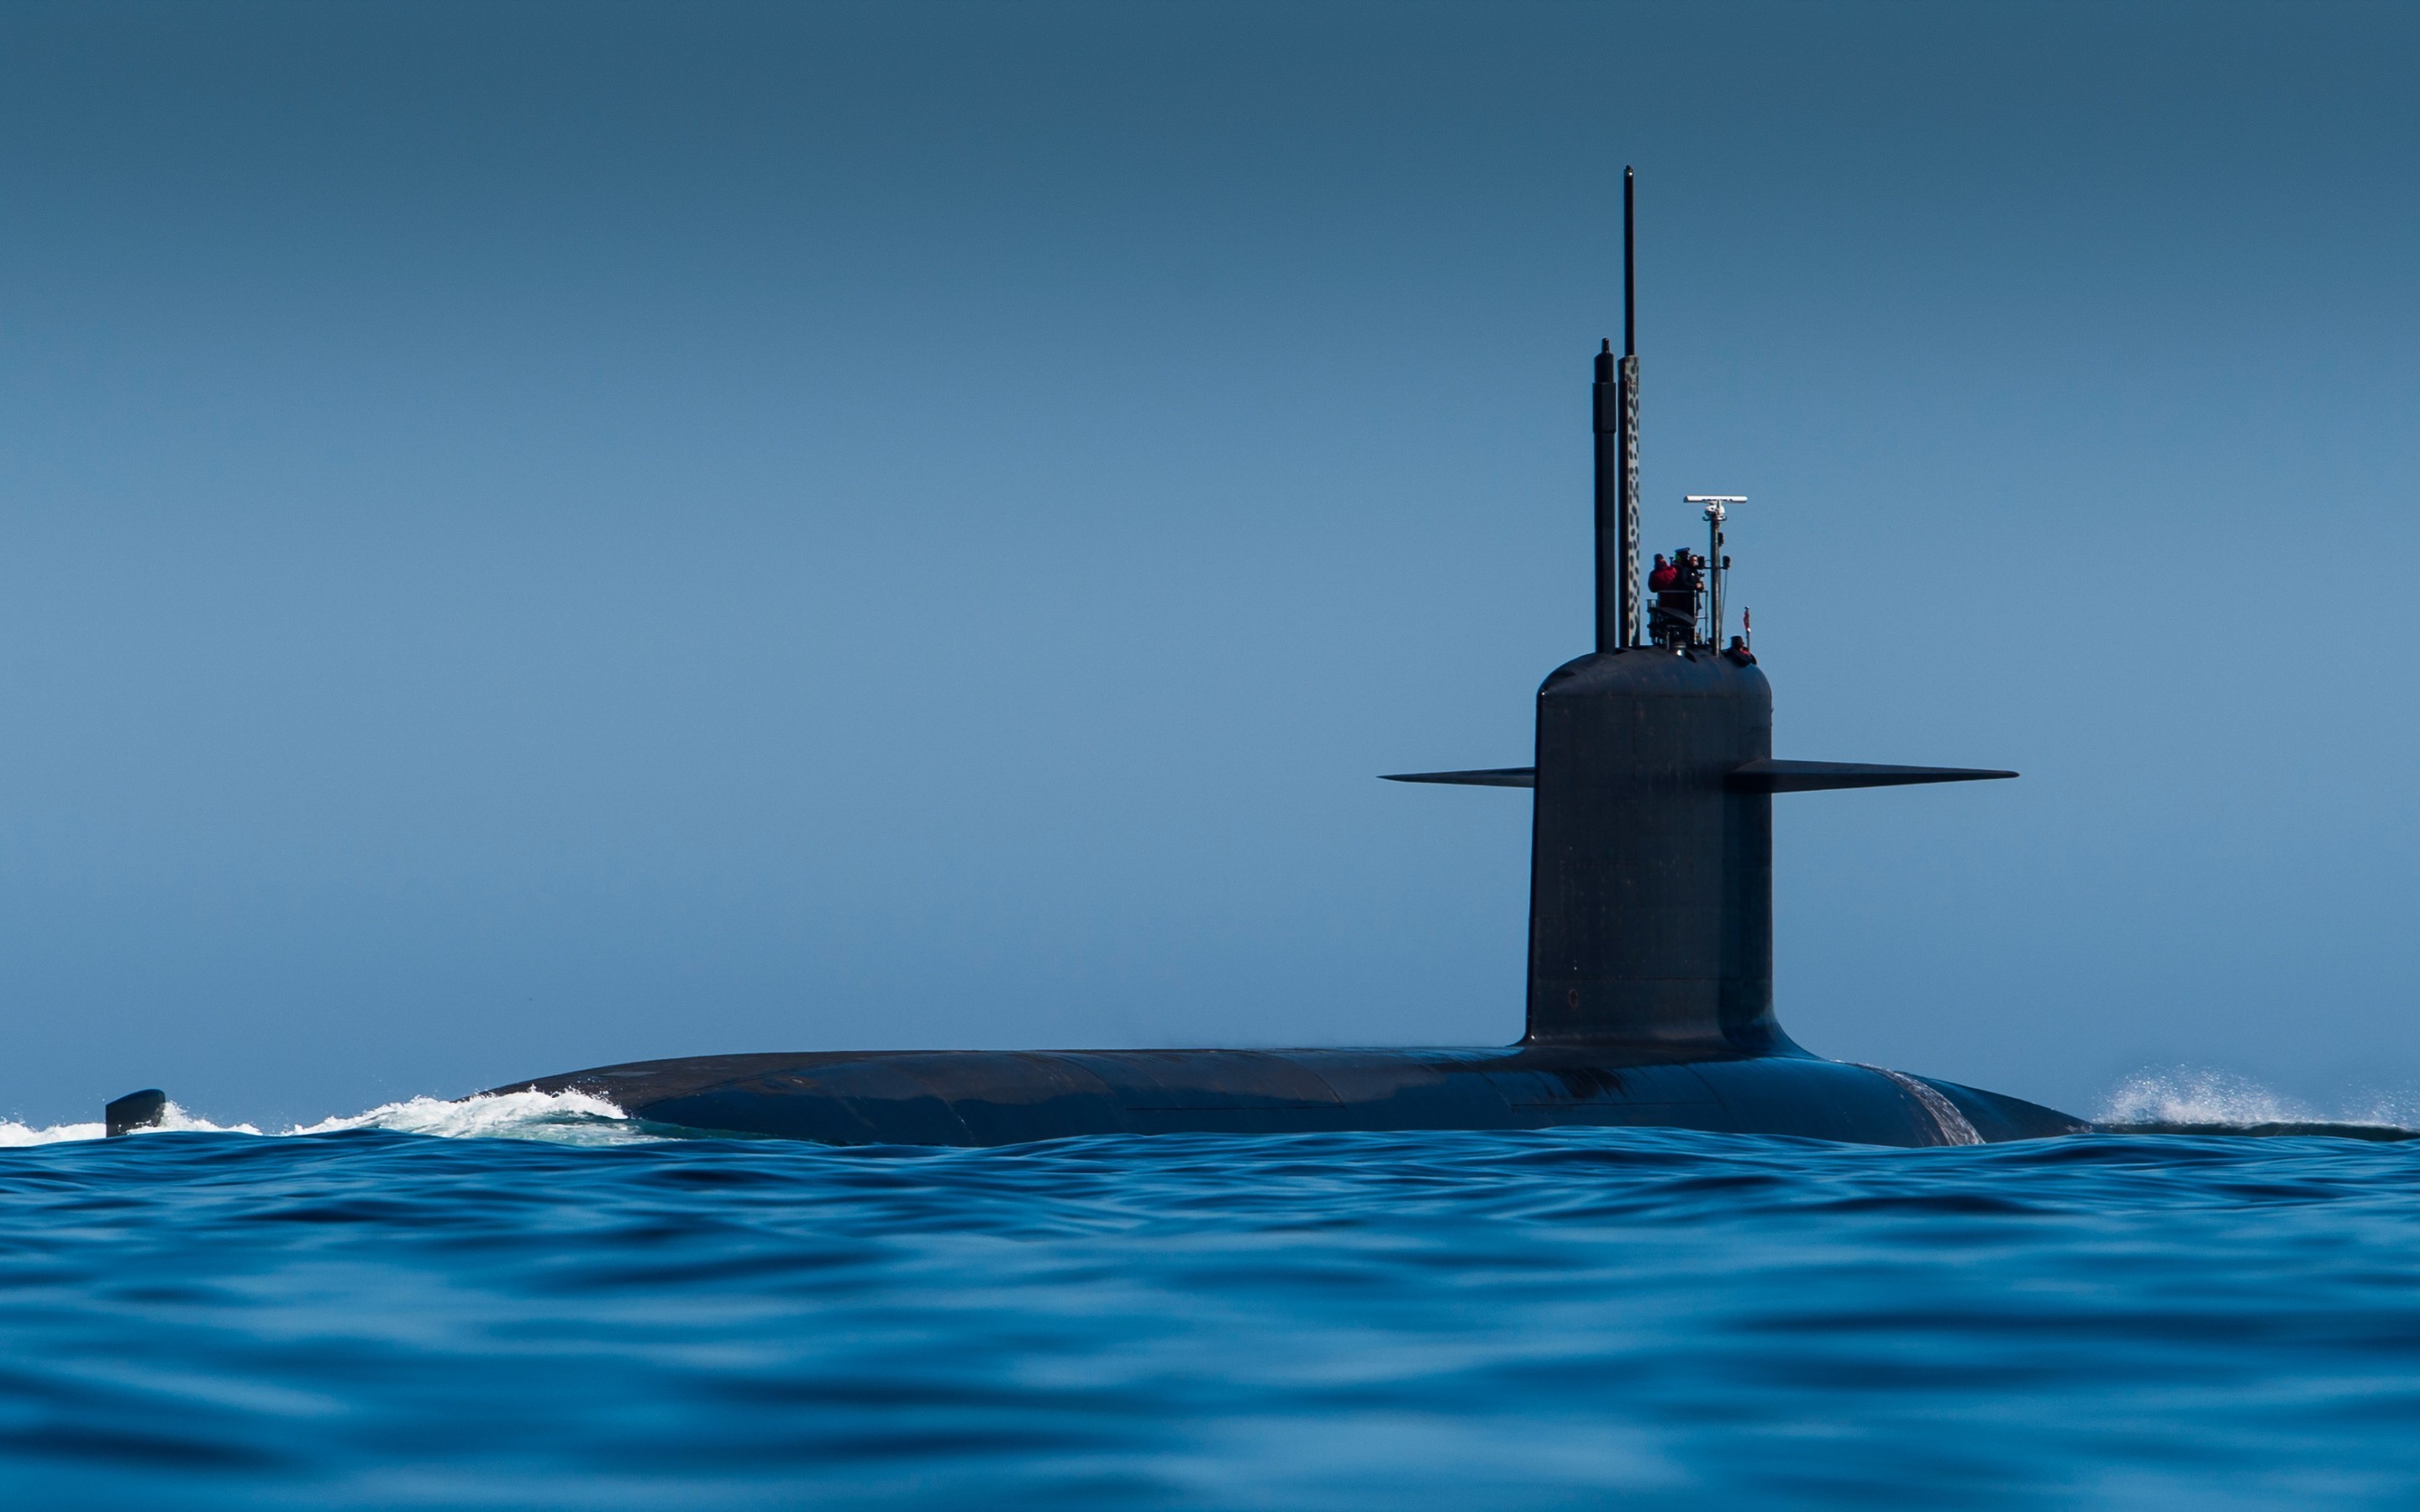 nature, Landscape, Sea, Water, Submarine, Waves, Blue, Men, Military, Antenna, Sky, Clear Sky Wallpaper